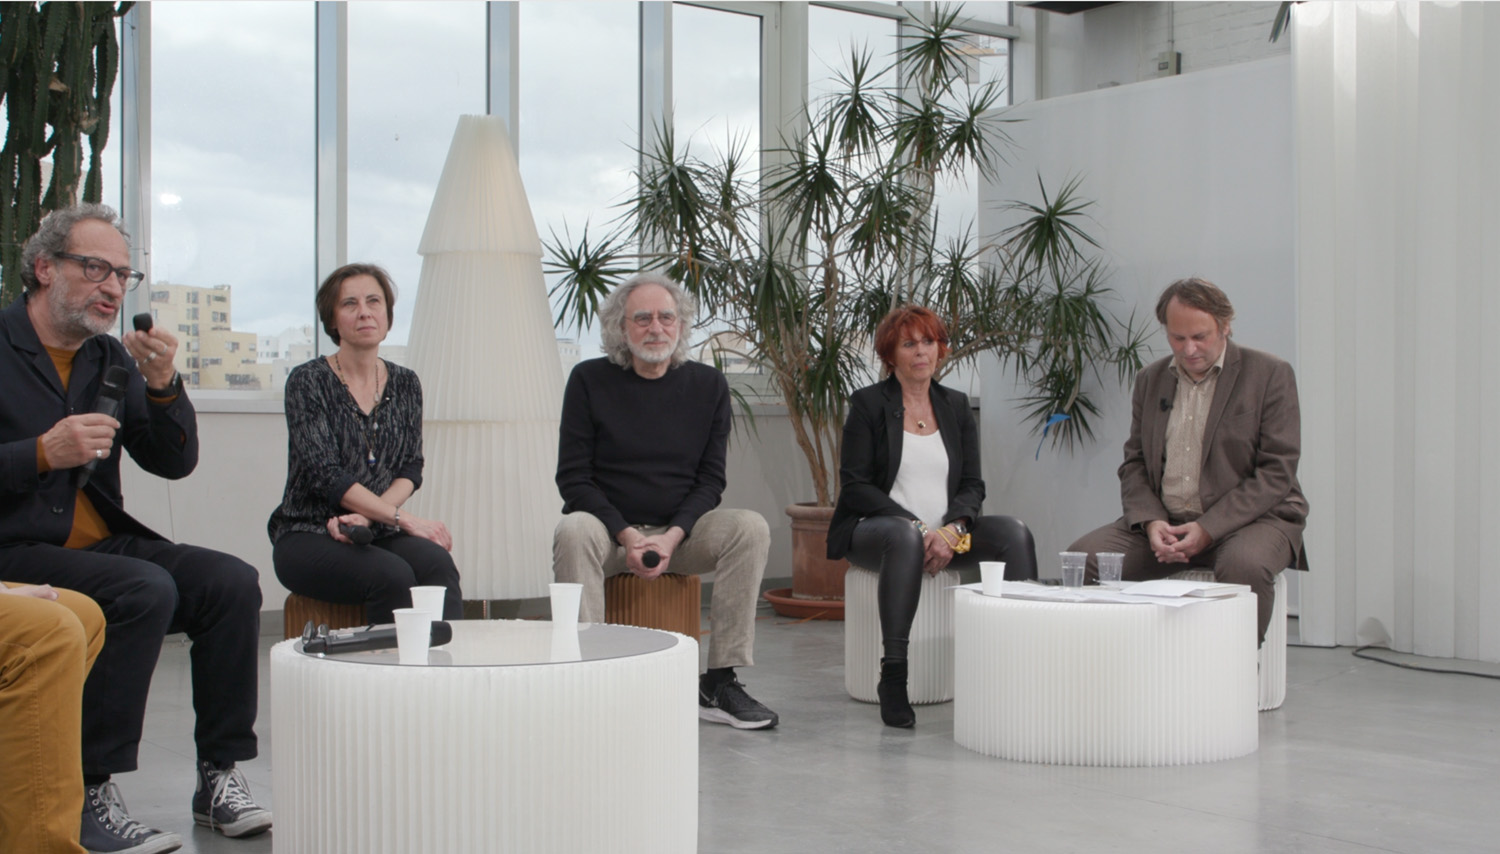 Table ronde architecture design conférence STREAMING TV WEB EMISSION PLATEAU SHOW